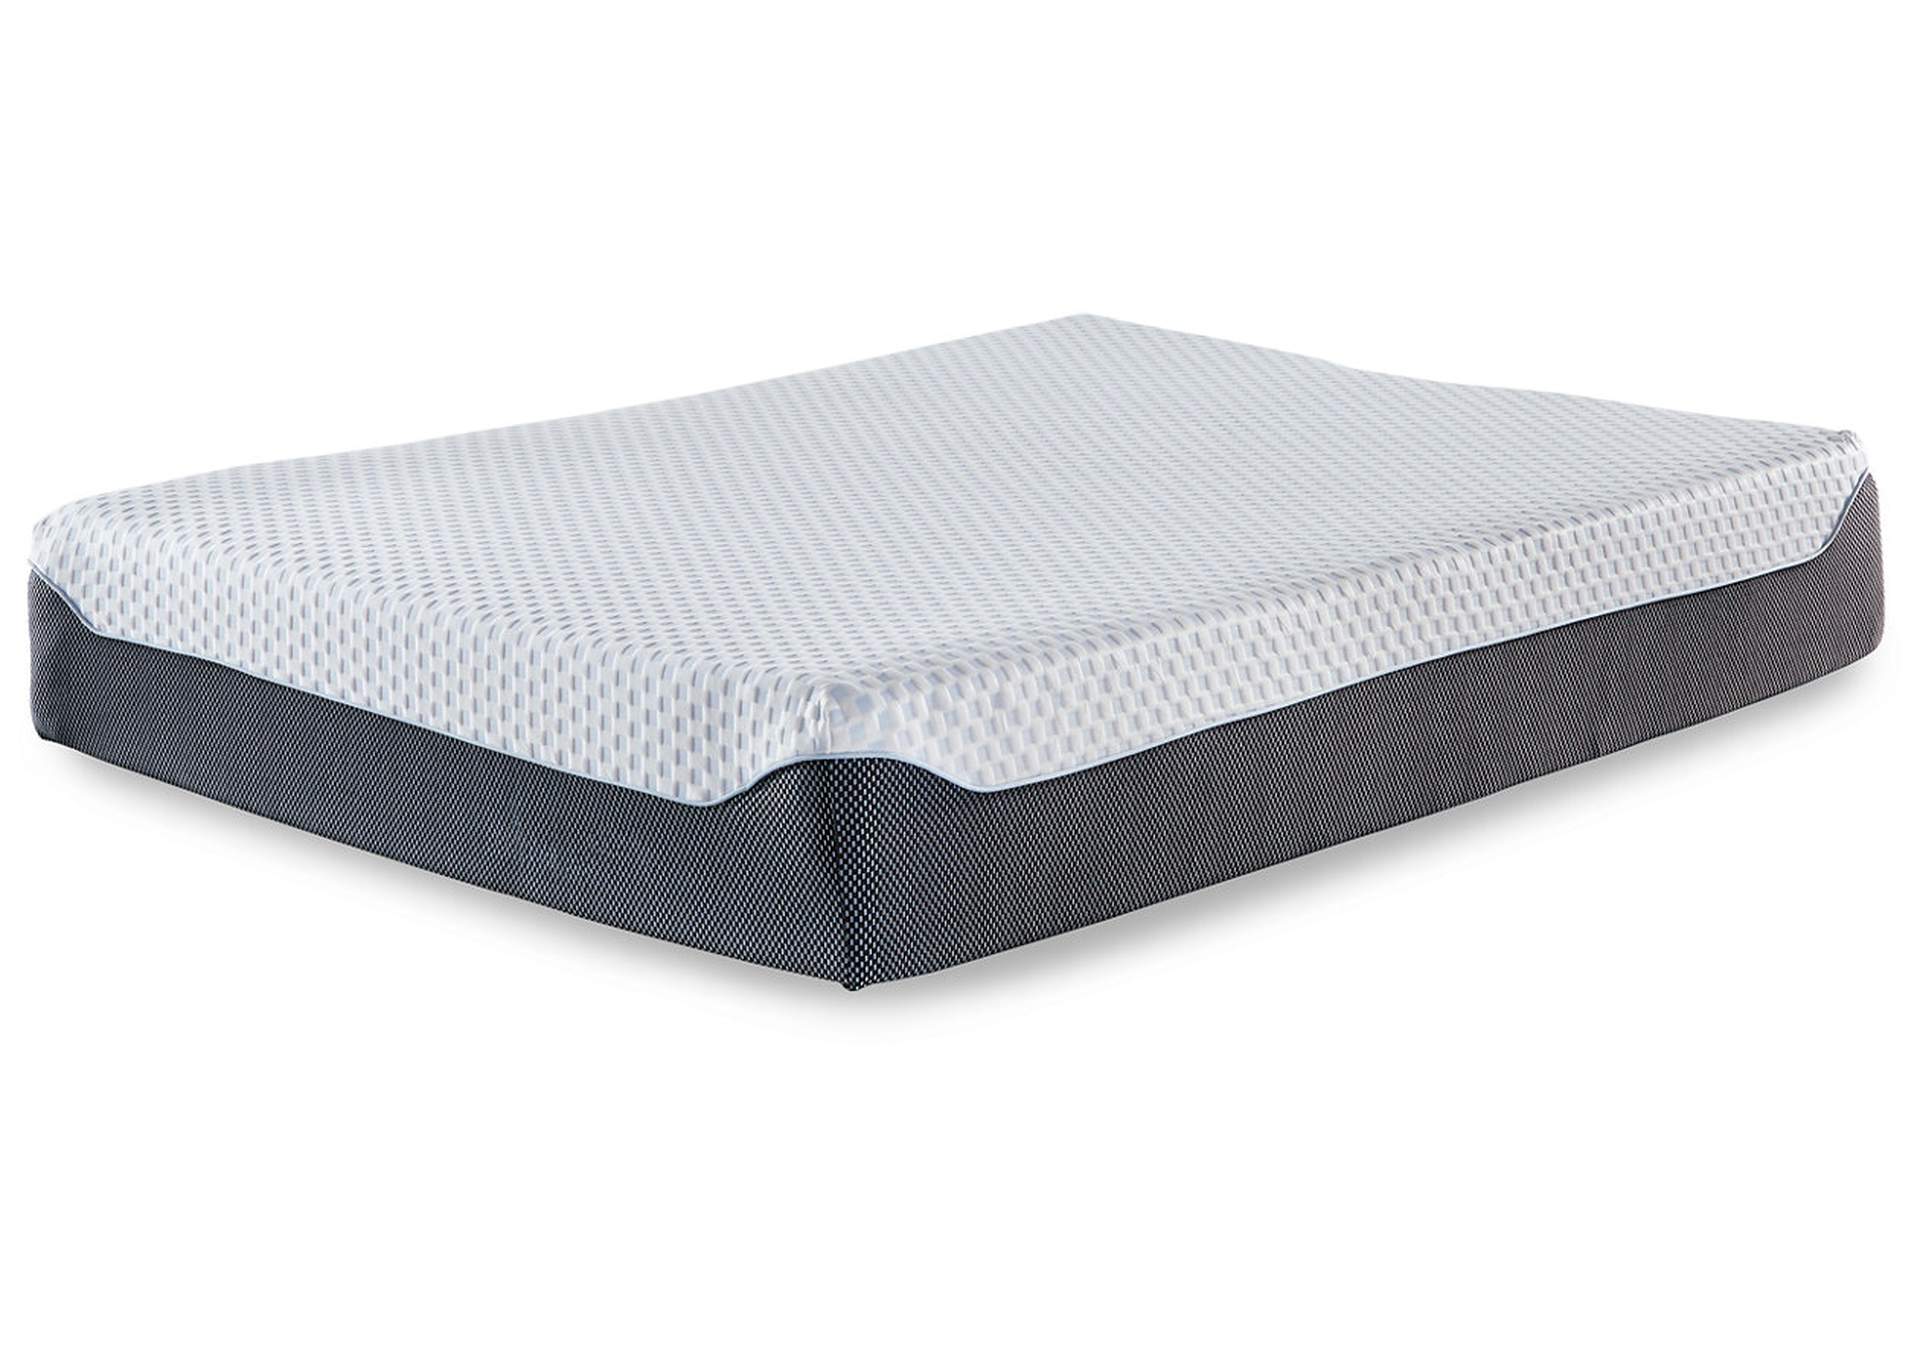 12 Inch Chime Elite Queen Adjustable Base with Mattress,Sierra Sleep by Ashley